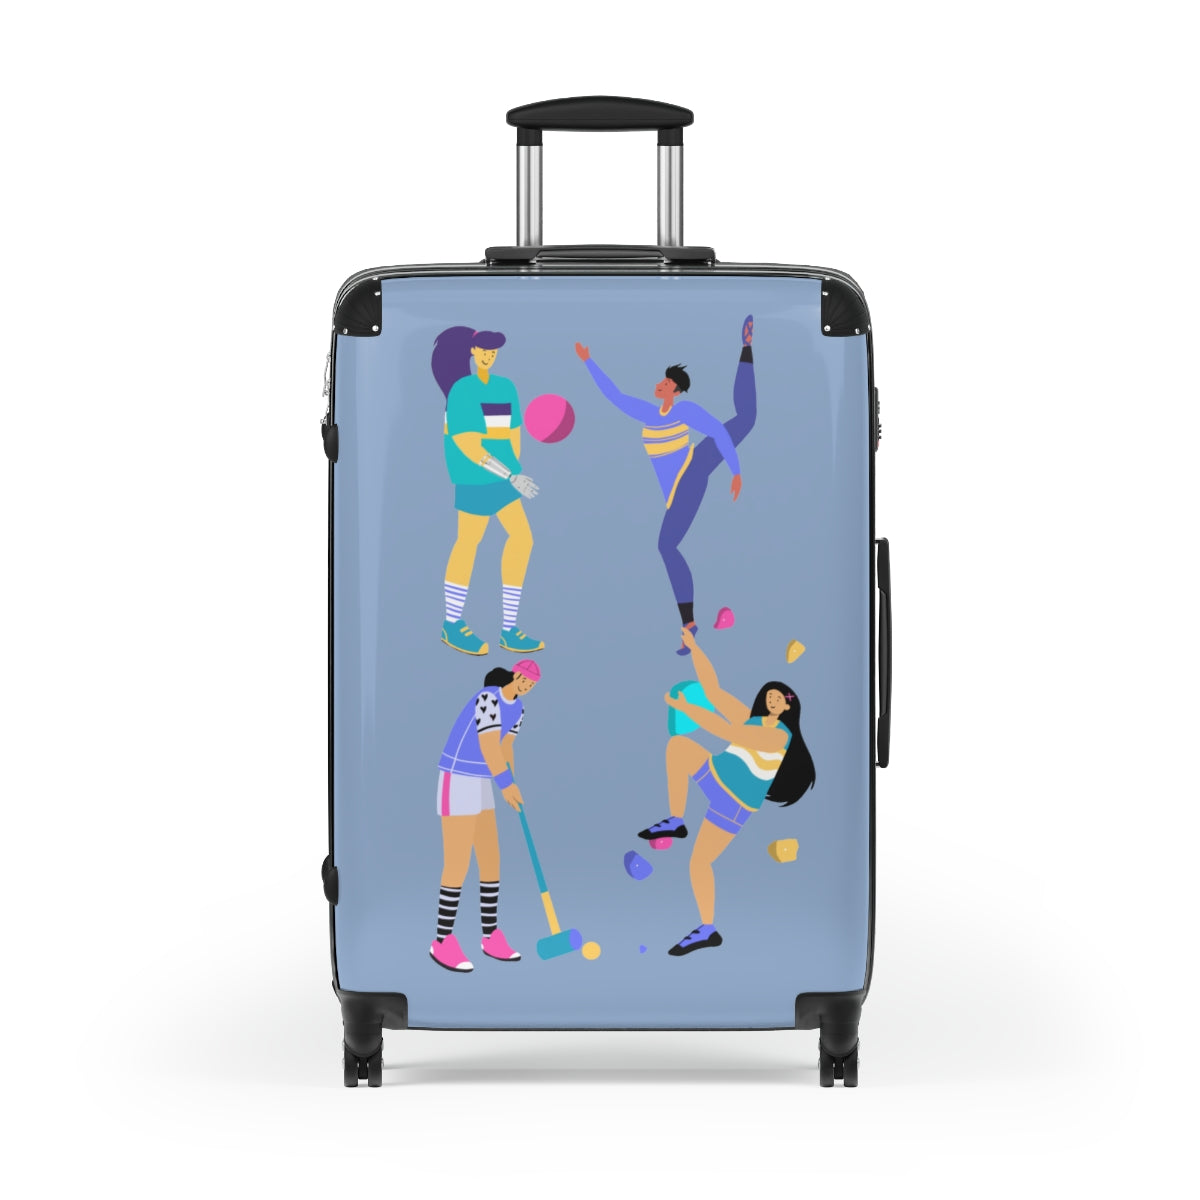 SUITCASES FOR WOMEN, Carry-on Luggage With Wheels, Spiinner, Designer Luggage By Artzira, Suitcases for Player Women